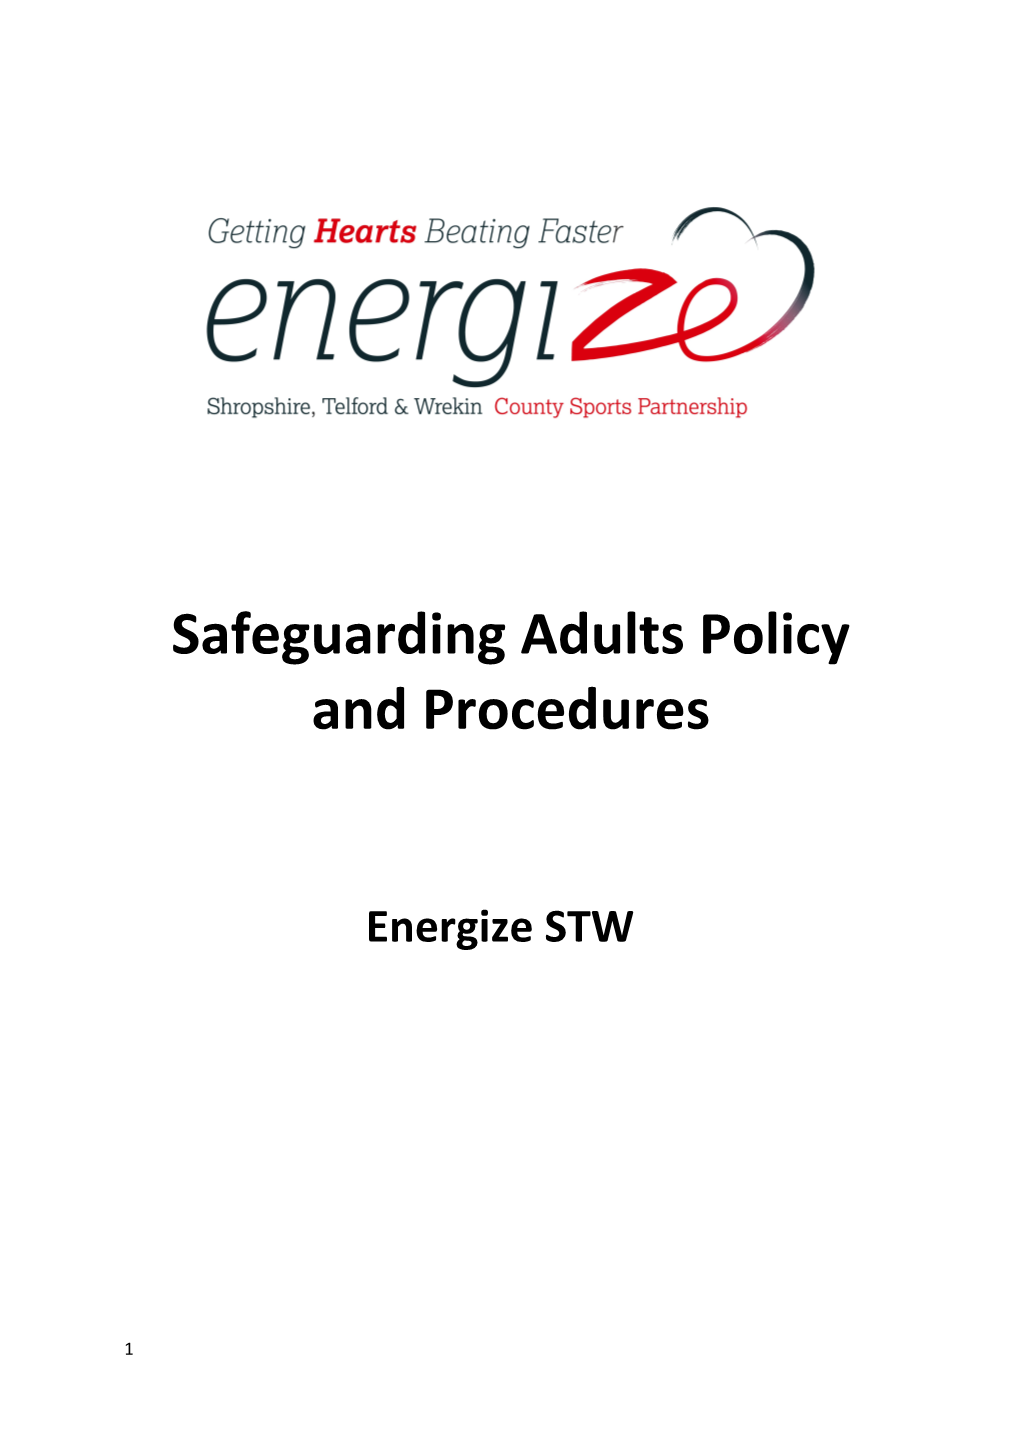 Safeguarding Adults Policy and Procedures